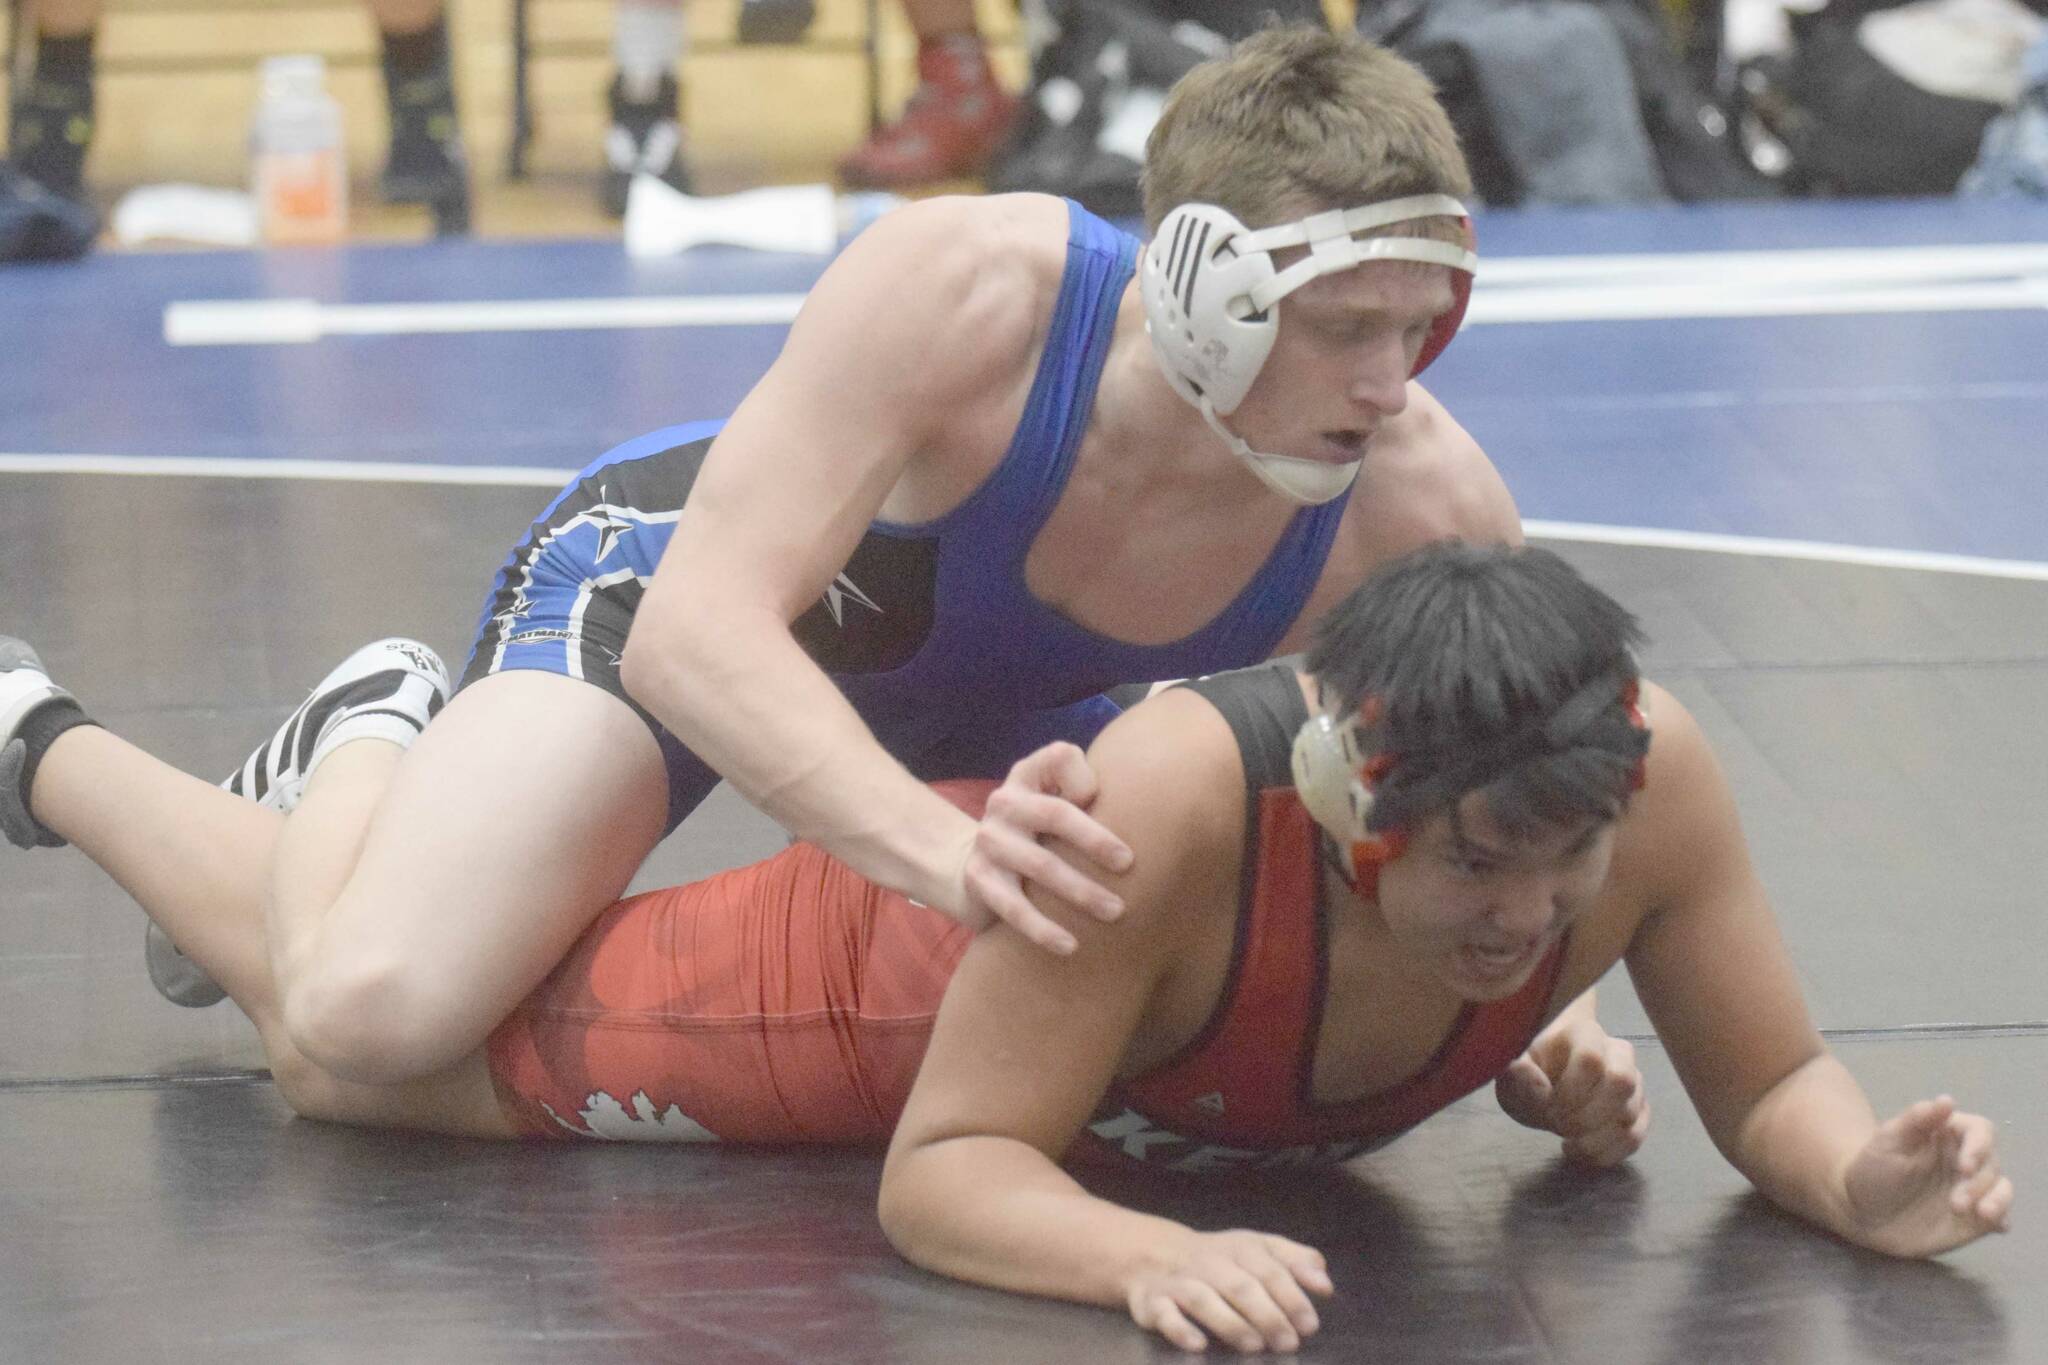 Soldotna's Wayne Mellon works to a pin of Kenai Central's Zoticus Active at 189 pounds in a dual meet at Soldotna High School on Tuesday, Nov. 30, 2021, in Soldotna, Alaska. (Photo by Jeff Helminiak/Peninsula Clarion)